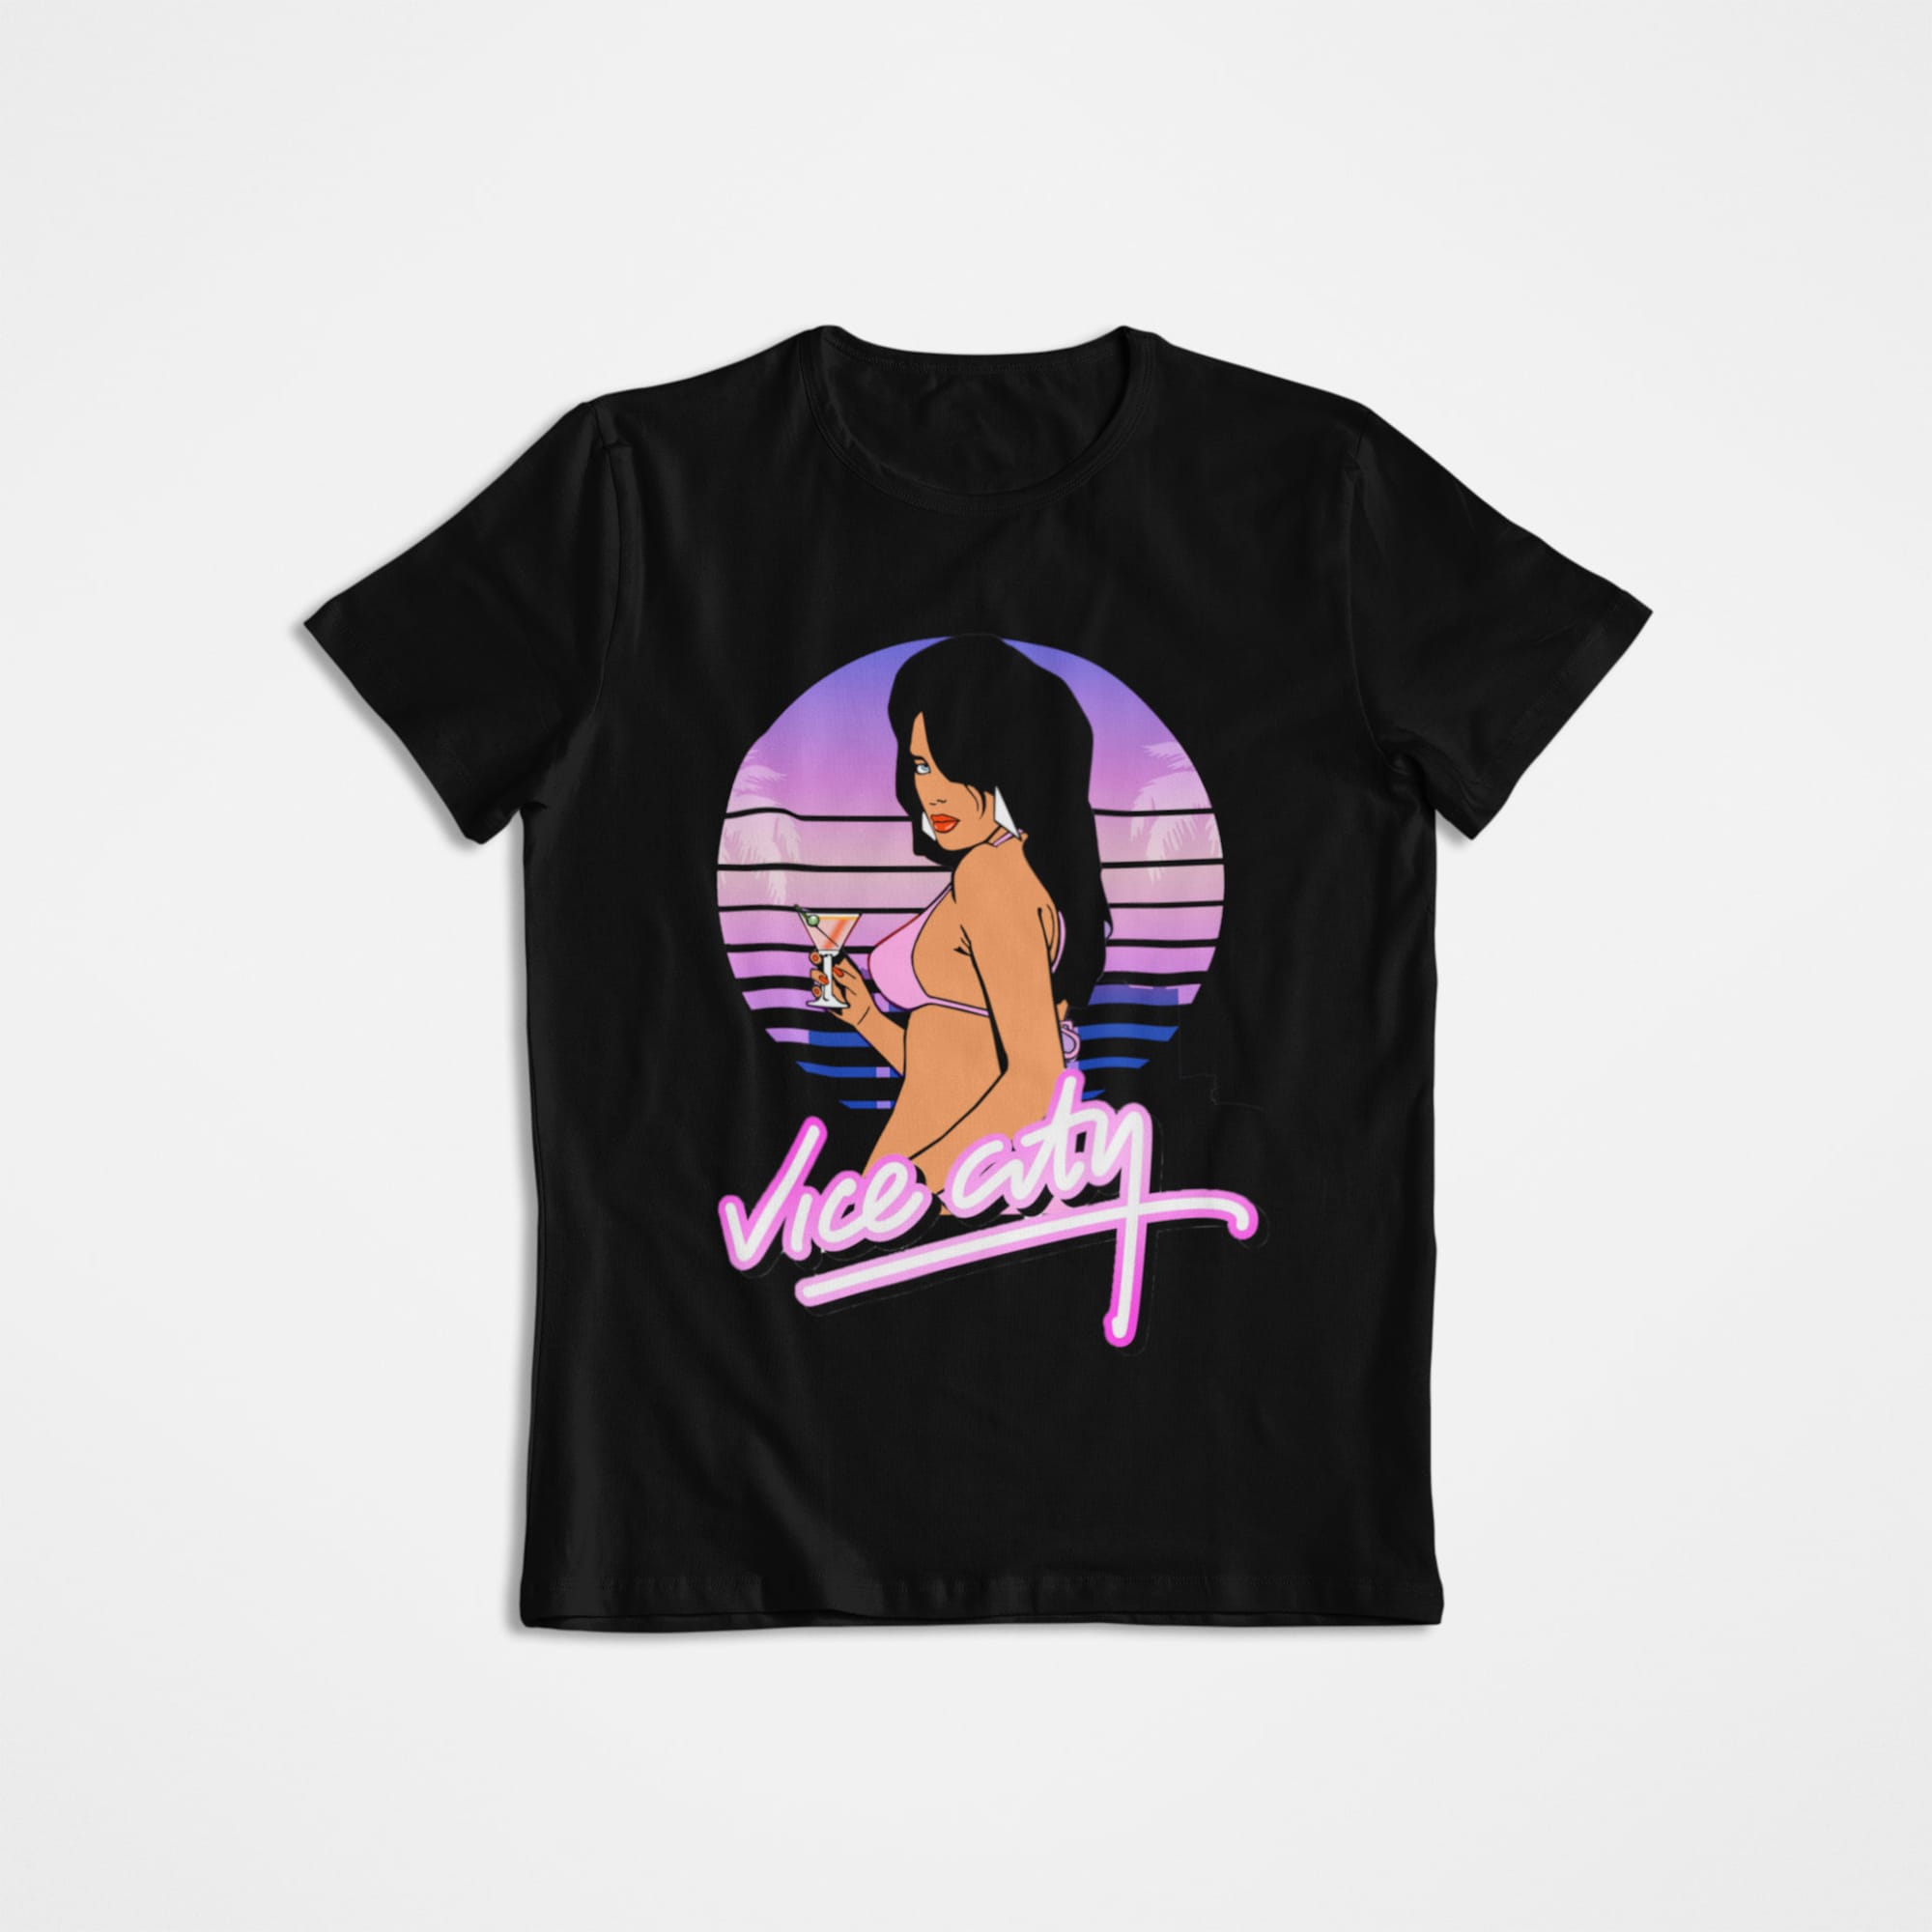 Discover Vintage Graphic T-Shirt, Graphic Tee ~ GTA Grand Theft Auto, Vice City, Miami